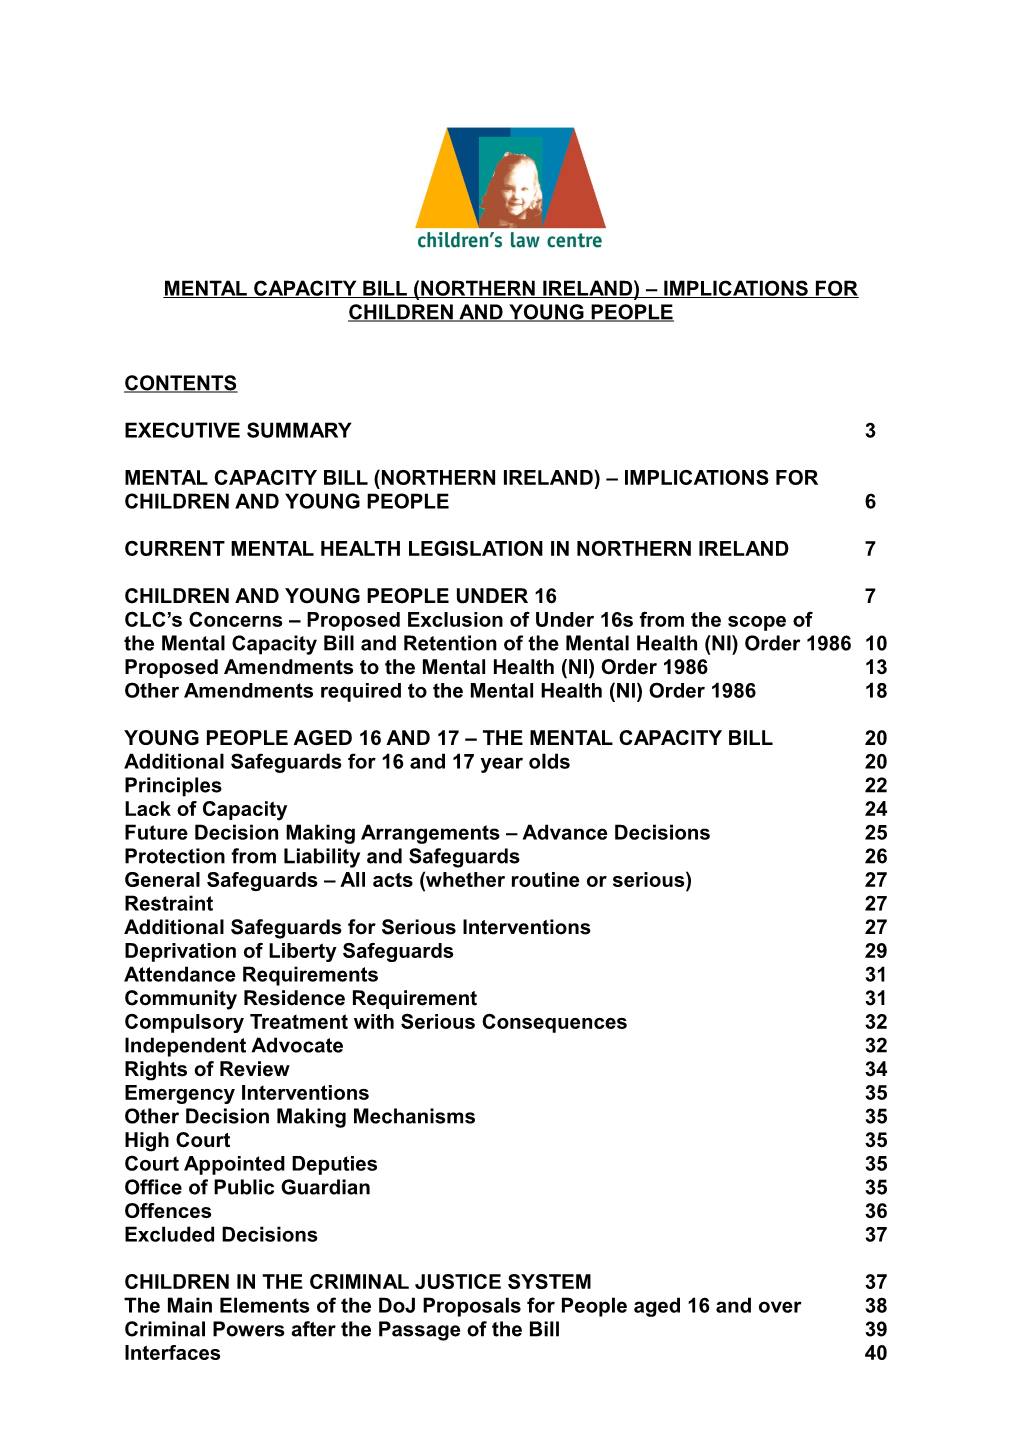 Mental Capacity Bill (Northern Ireland) Implications for Children and Young People